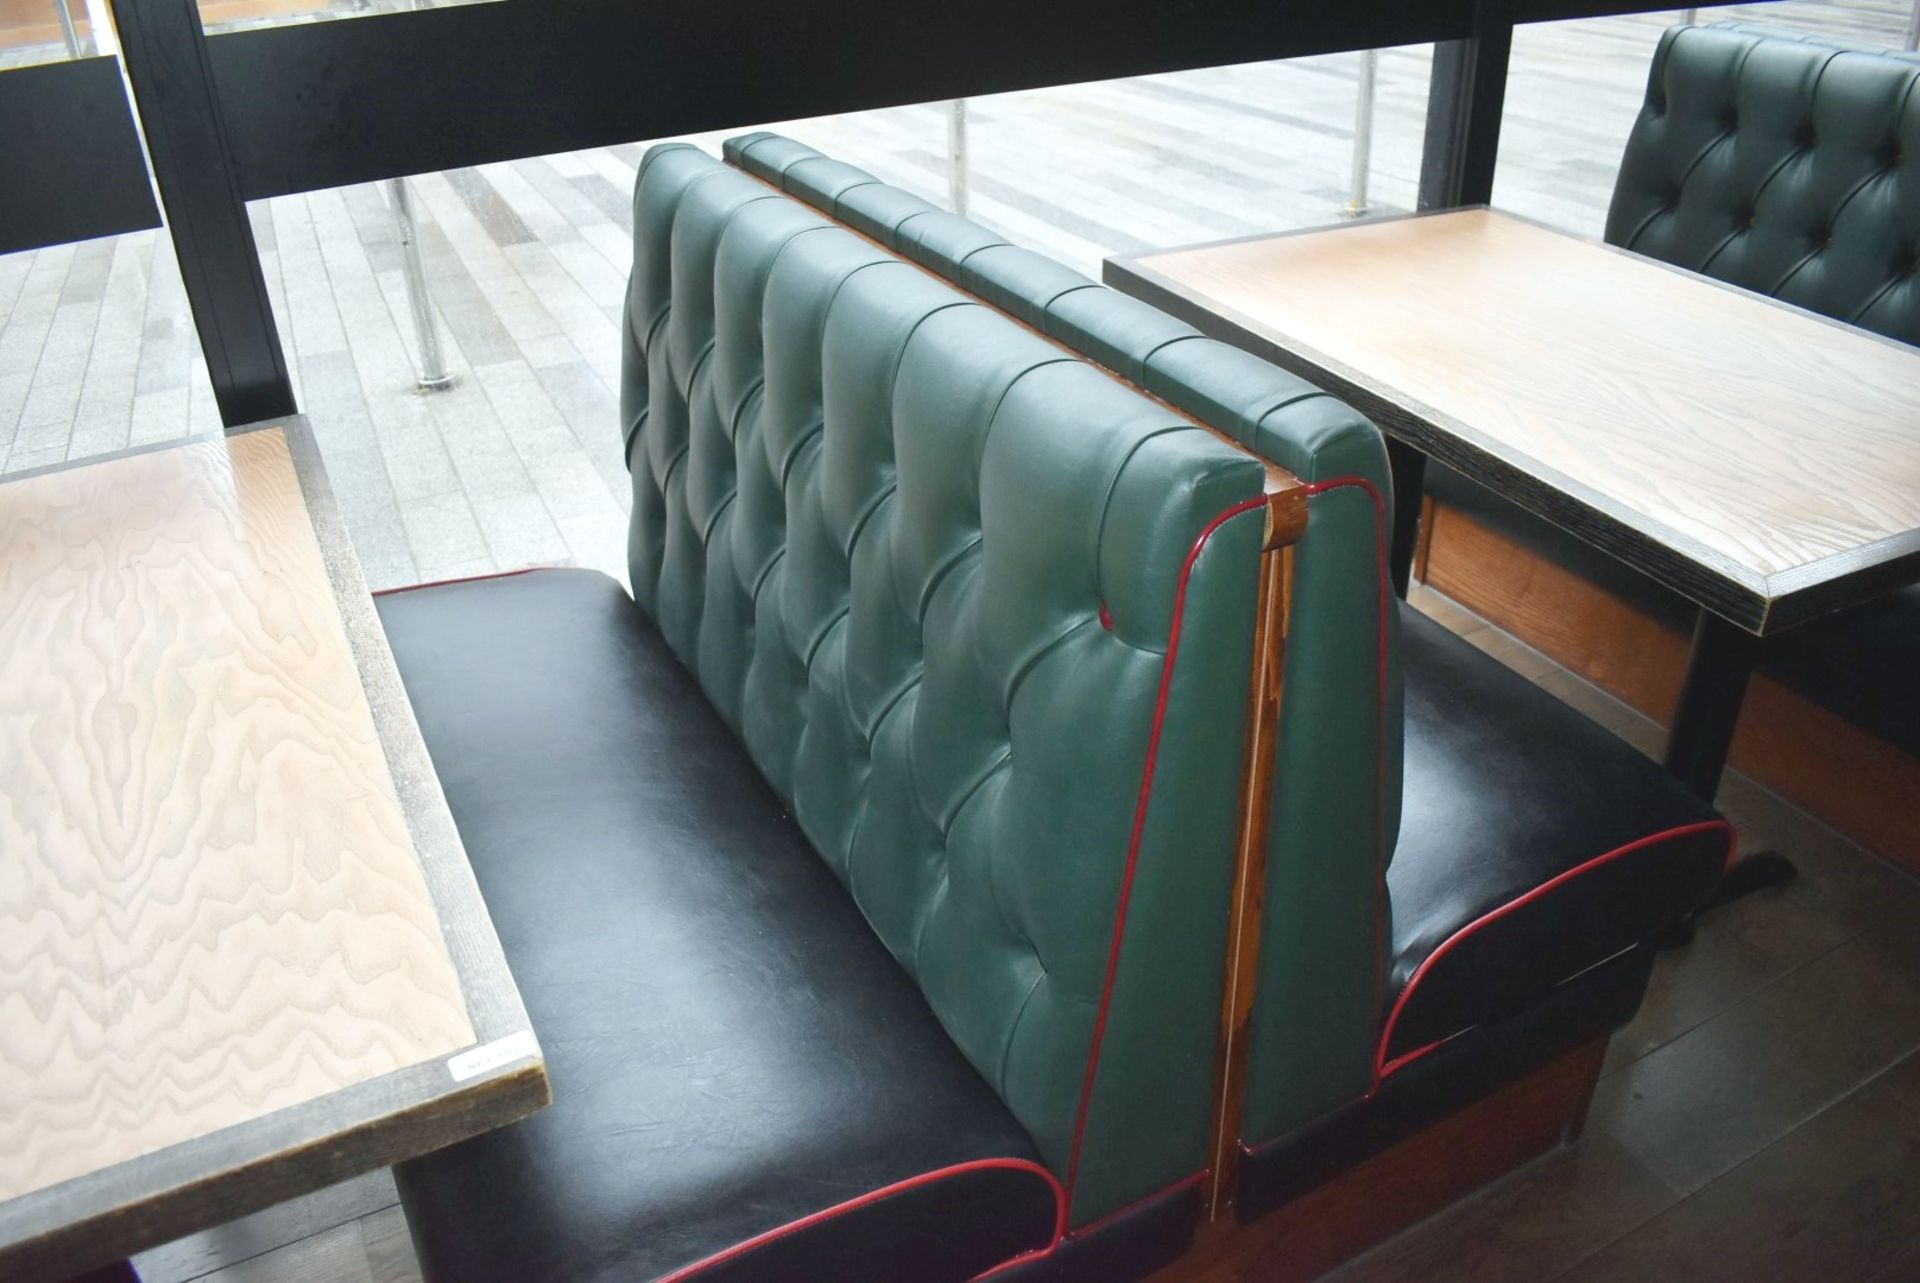 4 x Sections of Restaurant Double Booth Seating - Sits Up to 12 Persons - Green & Black Upholstery - Image 6 of 24